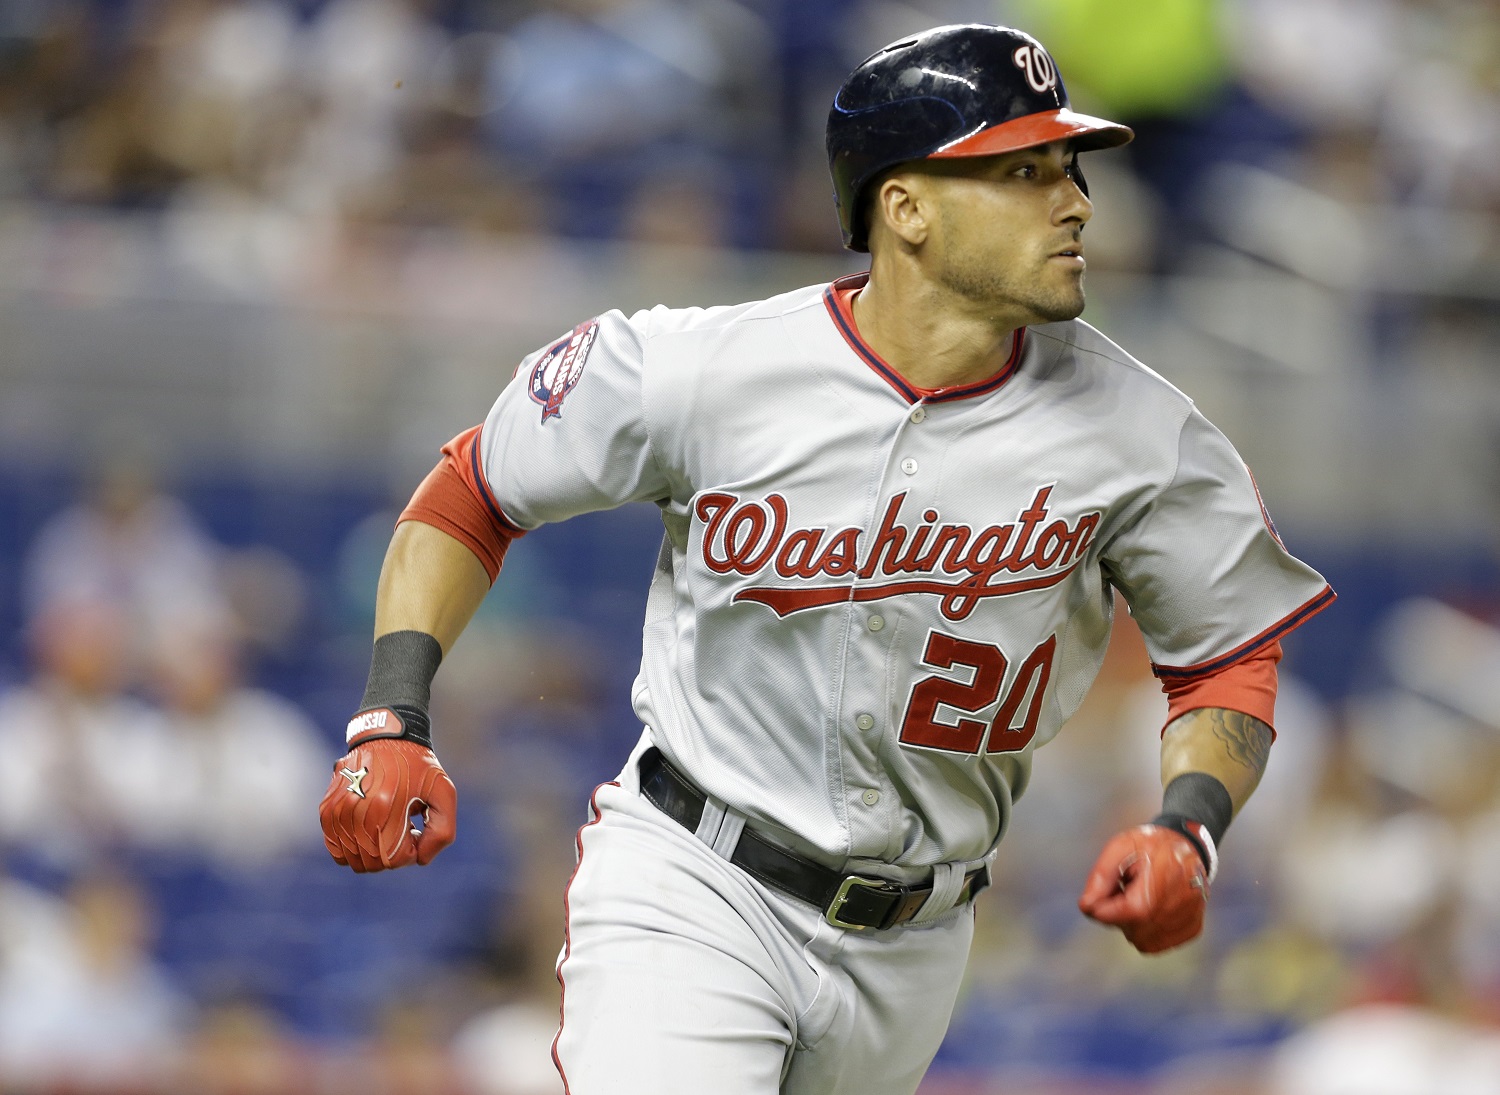 Washington Nationals' Ian Desmond (20) runs the bases during a baseball game against the Miami Marlins, Sunday, Sept. 13, 2015, in Miami. The Nationals defeated the Marlins 5-0. (AP Photo/Lynne Sladky)